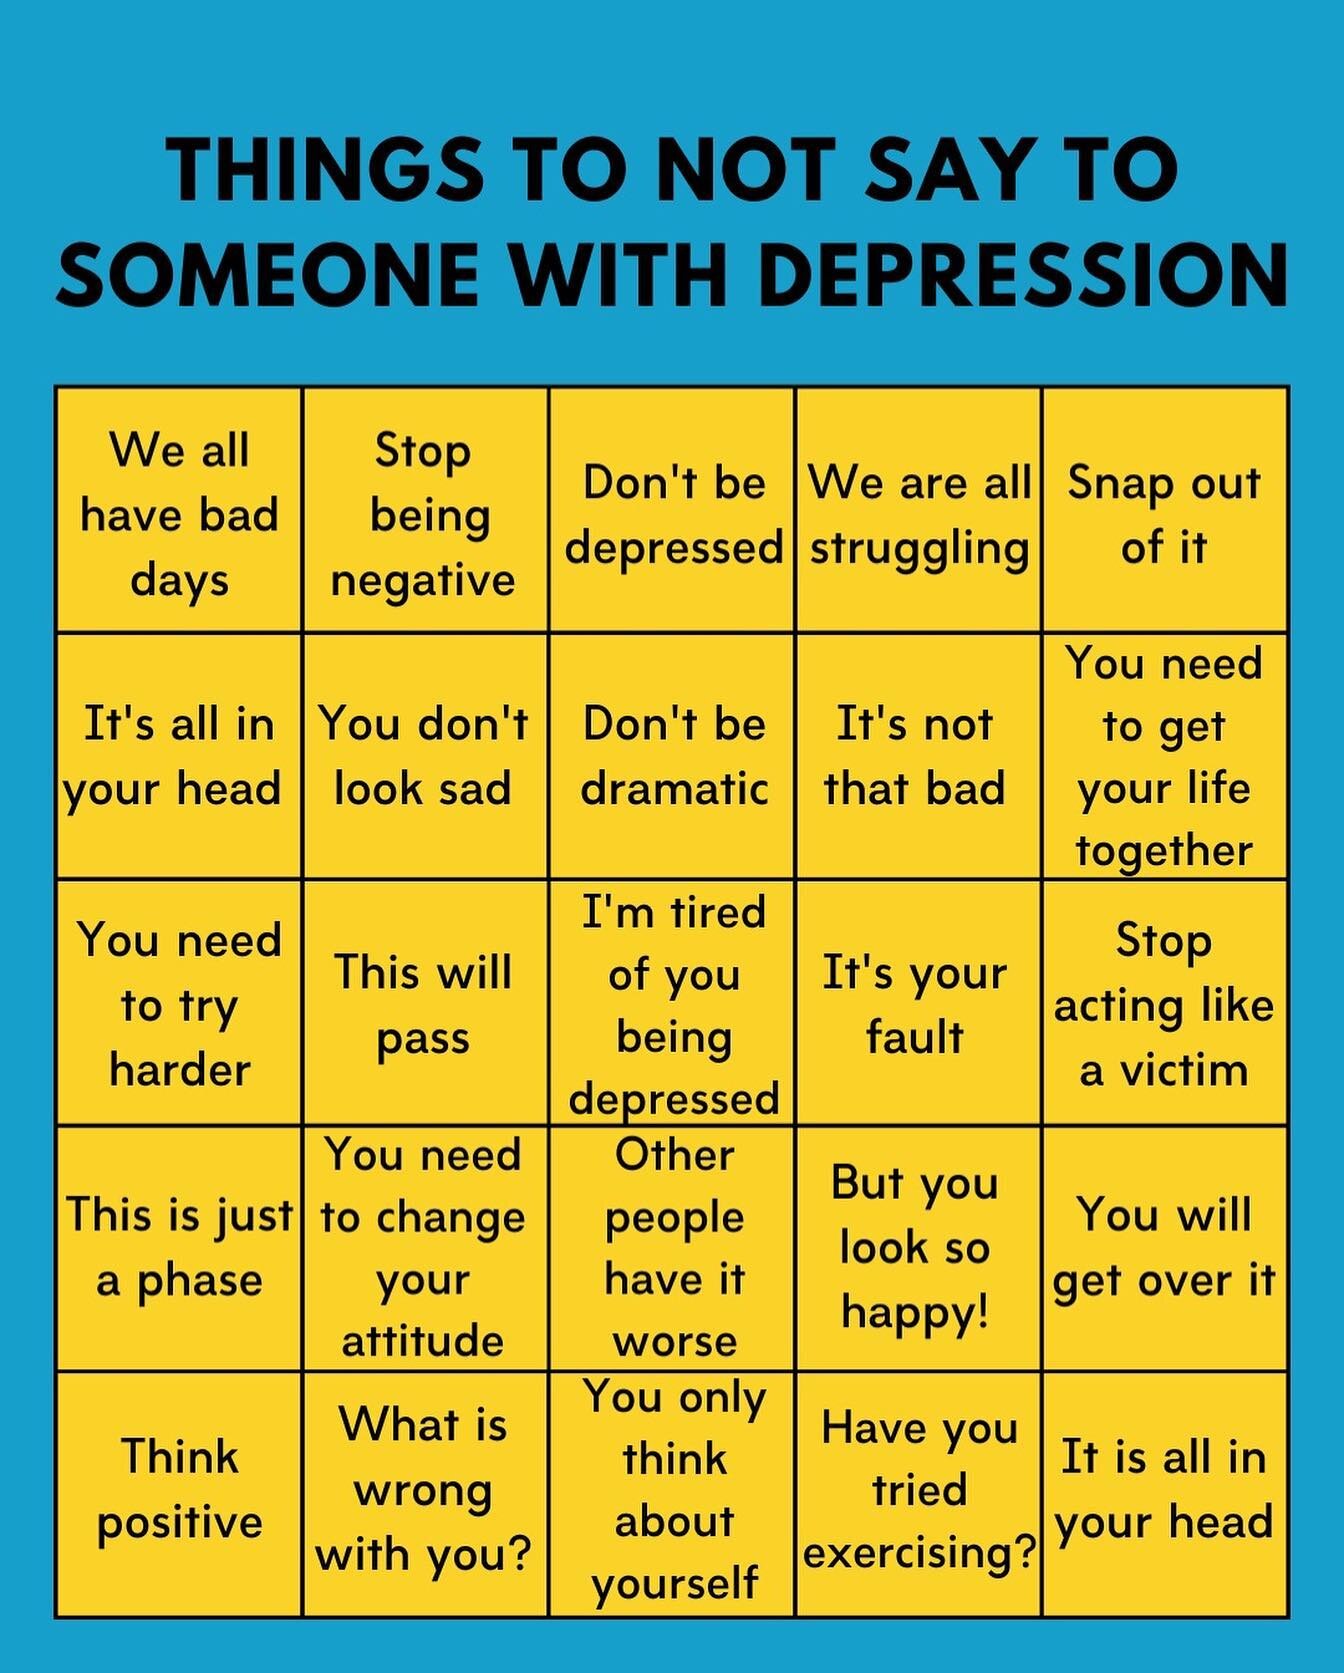 When someone you care about is depressed, offering advice or wisdom may come from a place of good intentions. However, the words you use may convey a different message if you don't understand the nature of depression and mental illness. It's importan